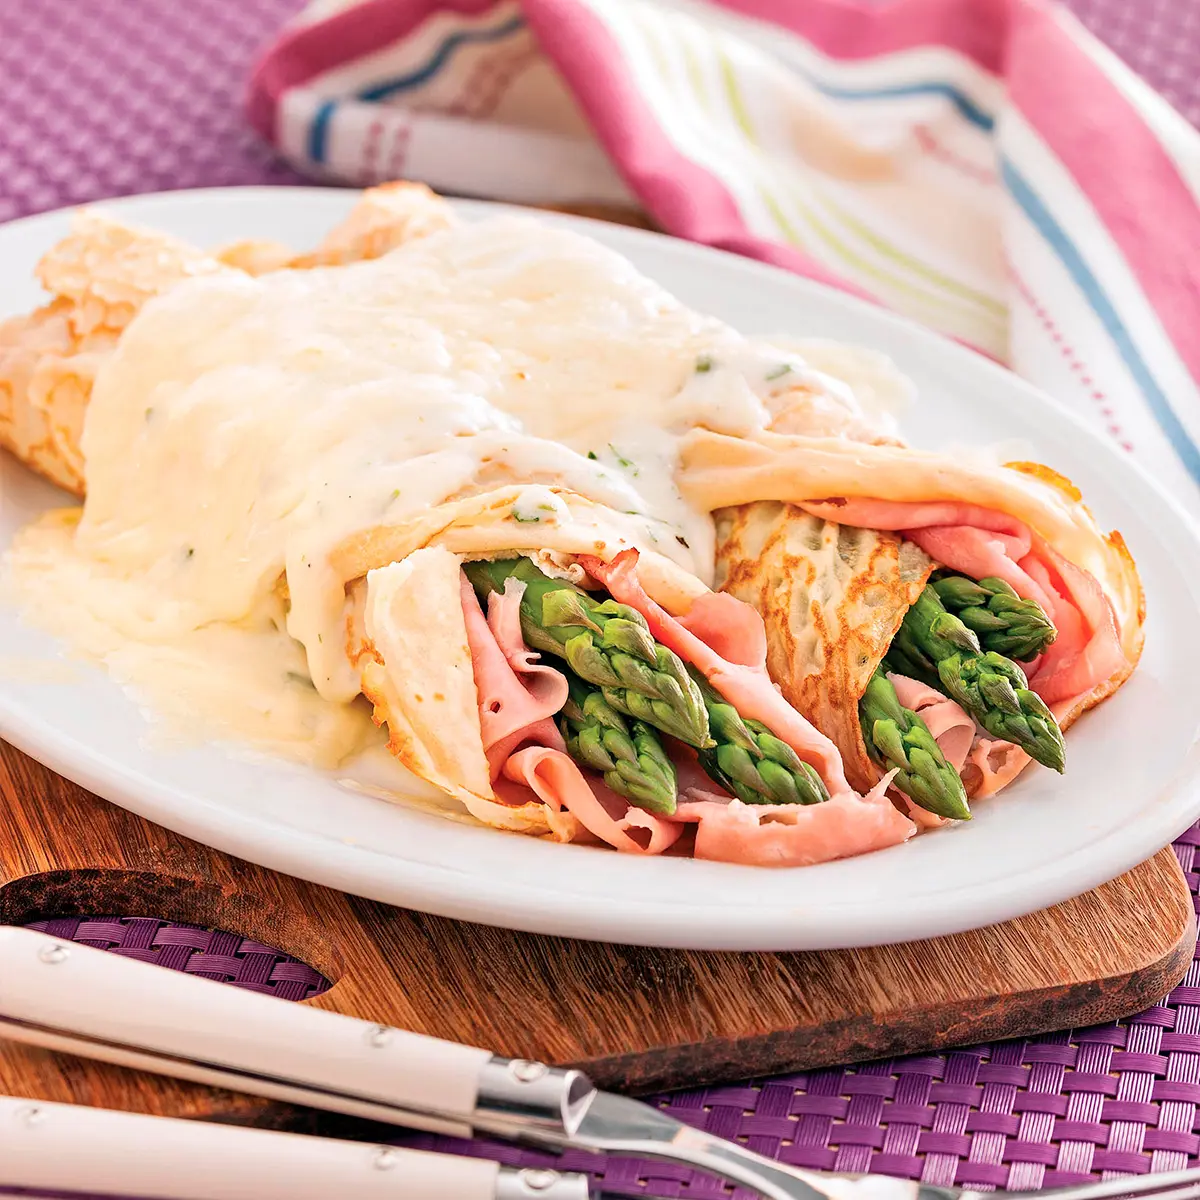 Stuffed crepes with ham and asparagus